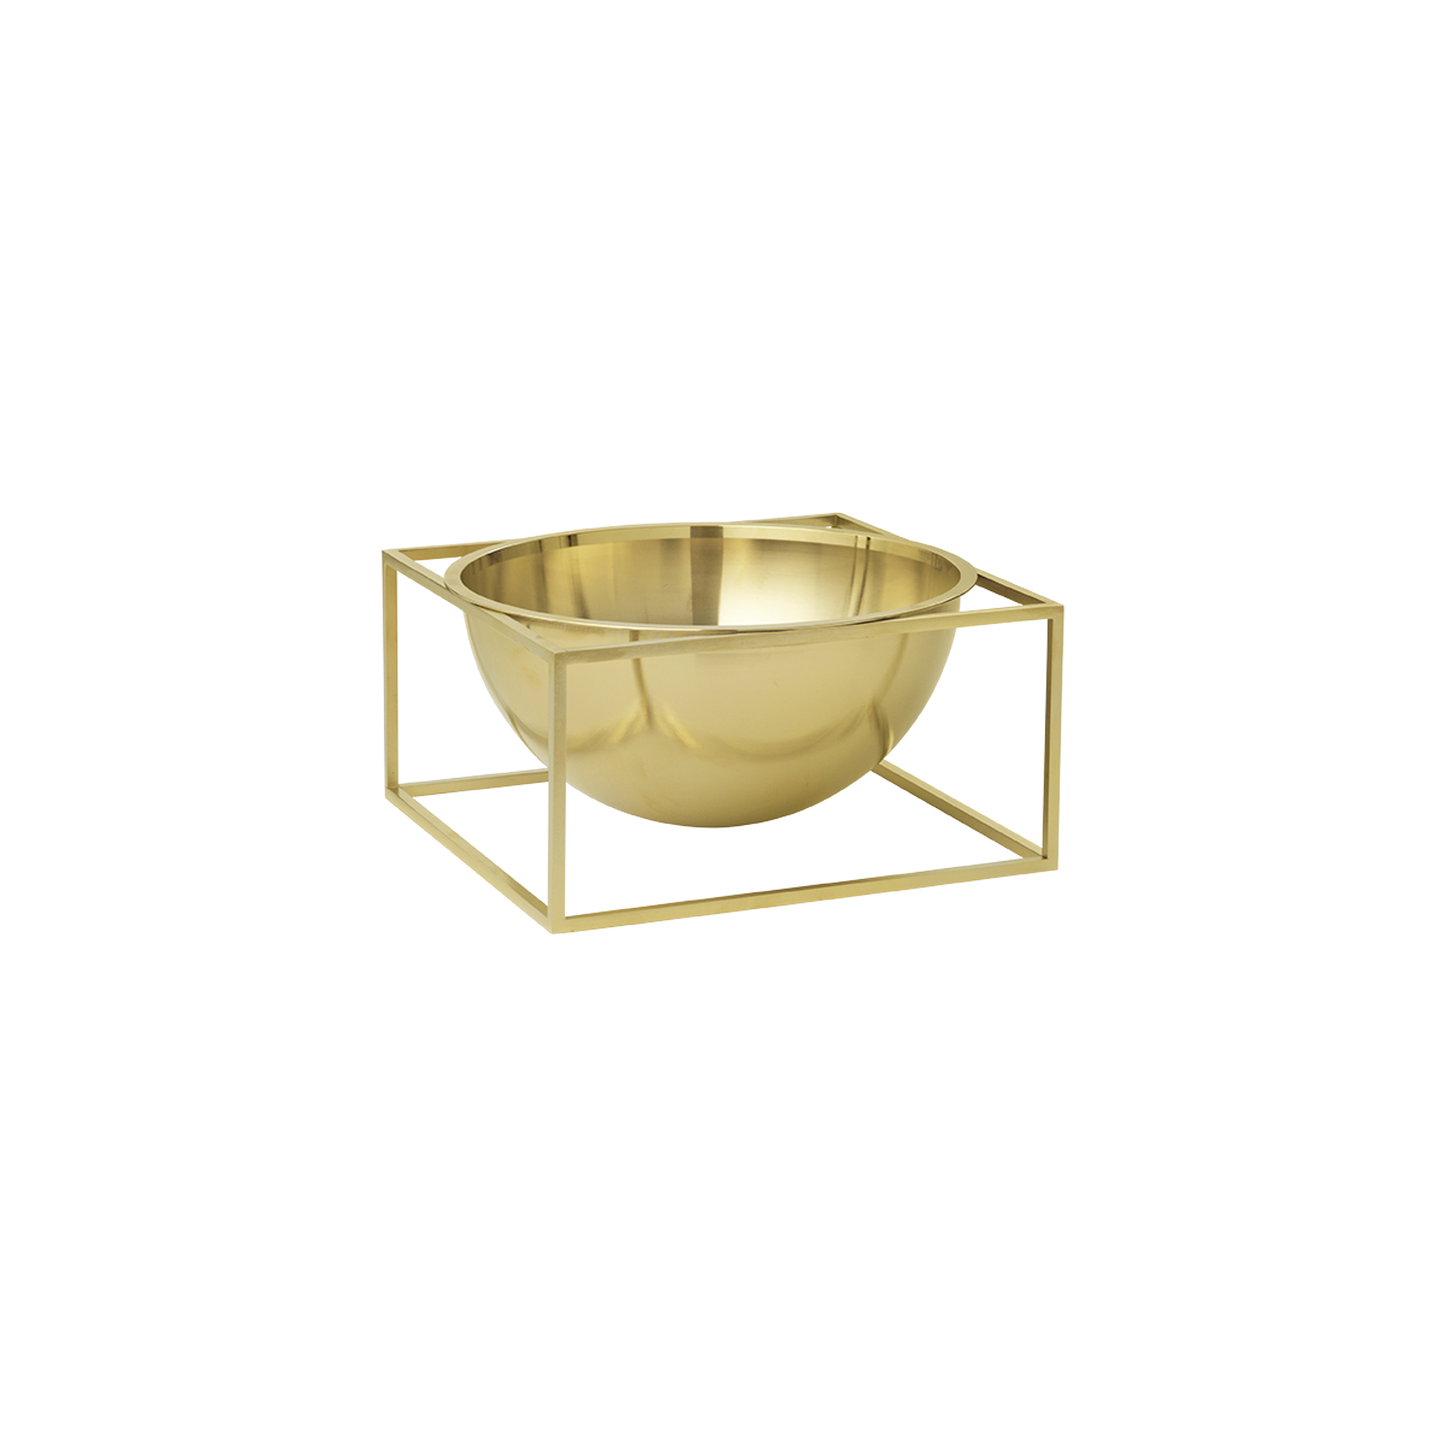 Audo Bowl Centerpiece Small by Audo #Gold Plated